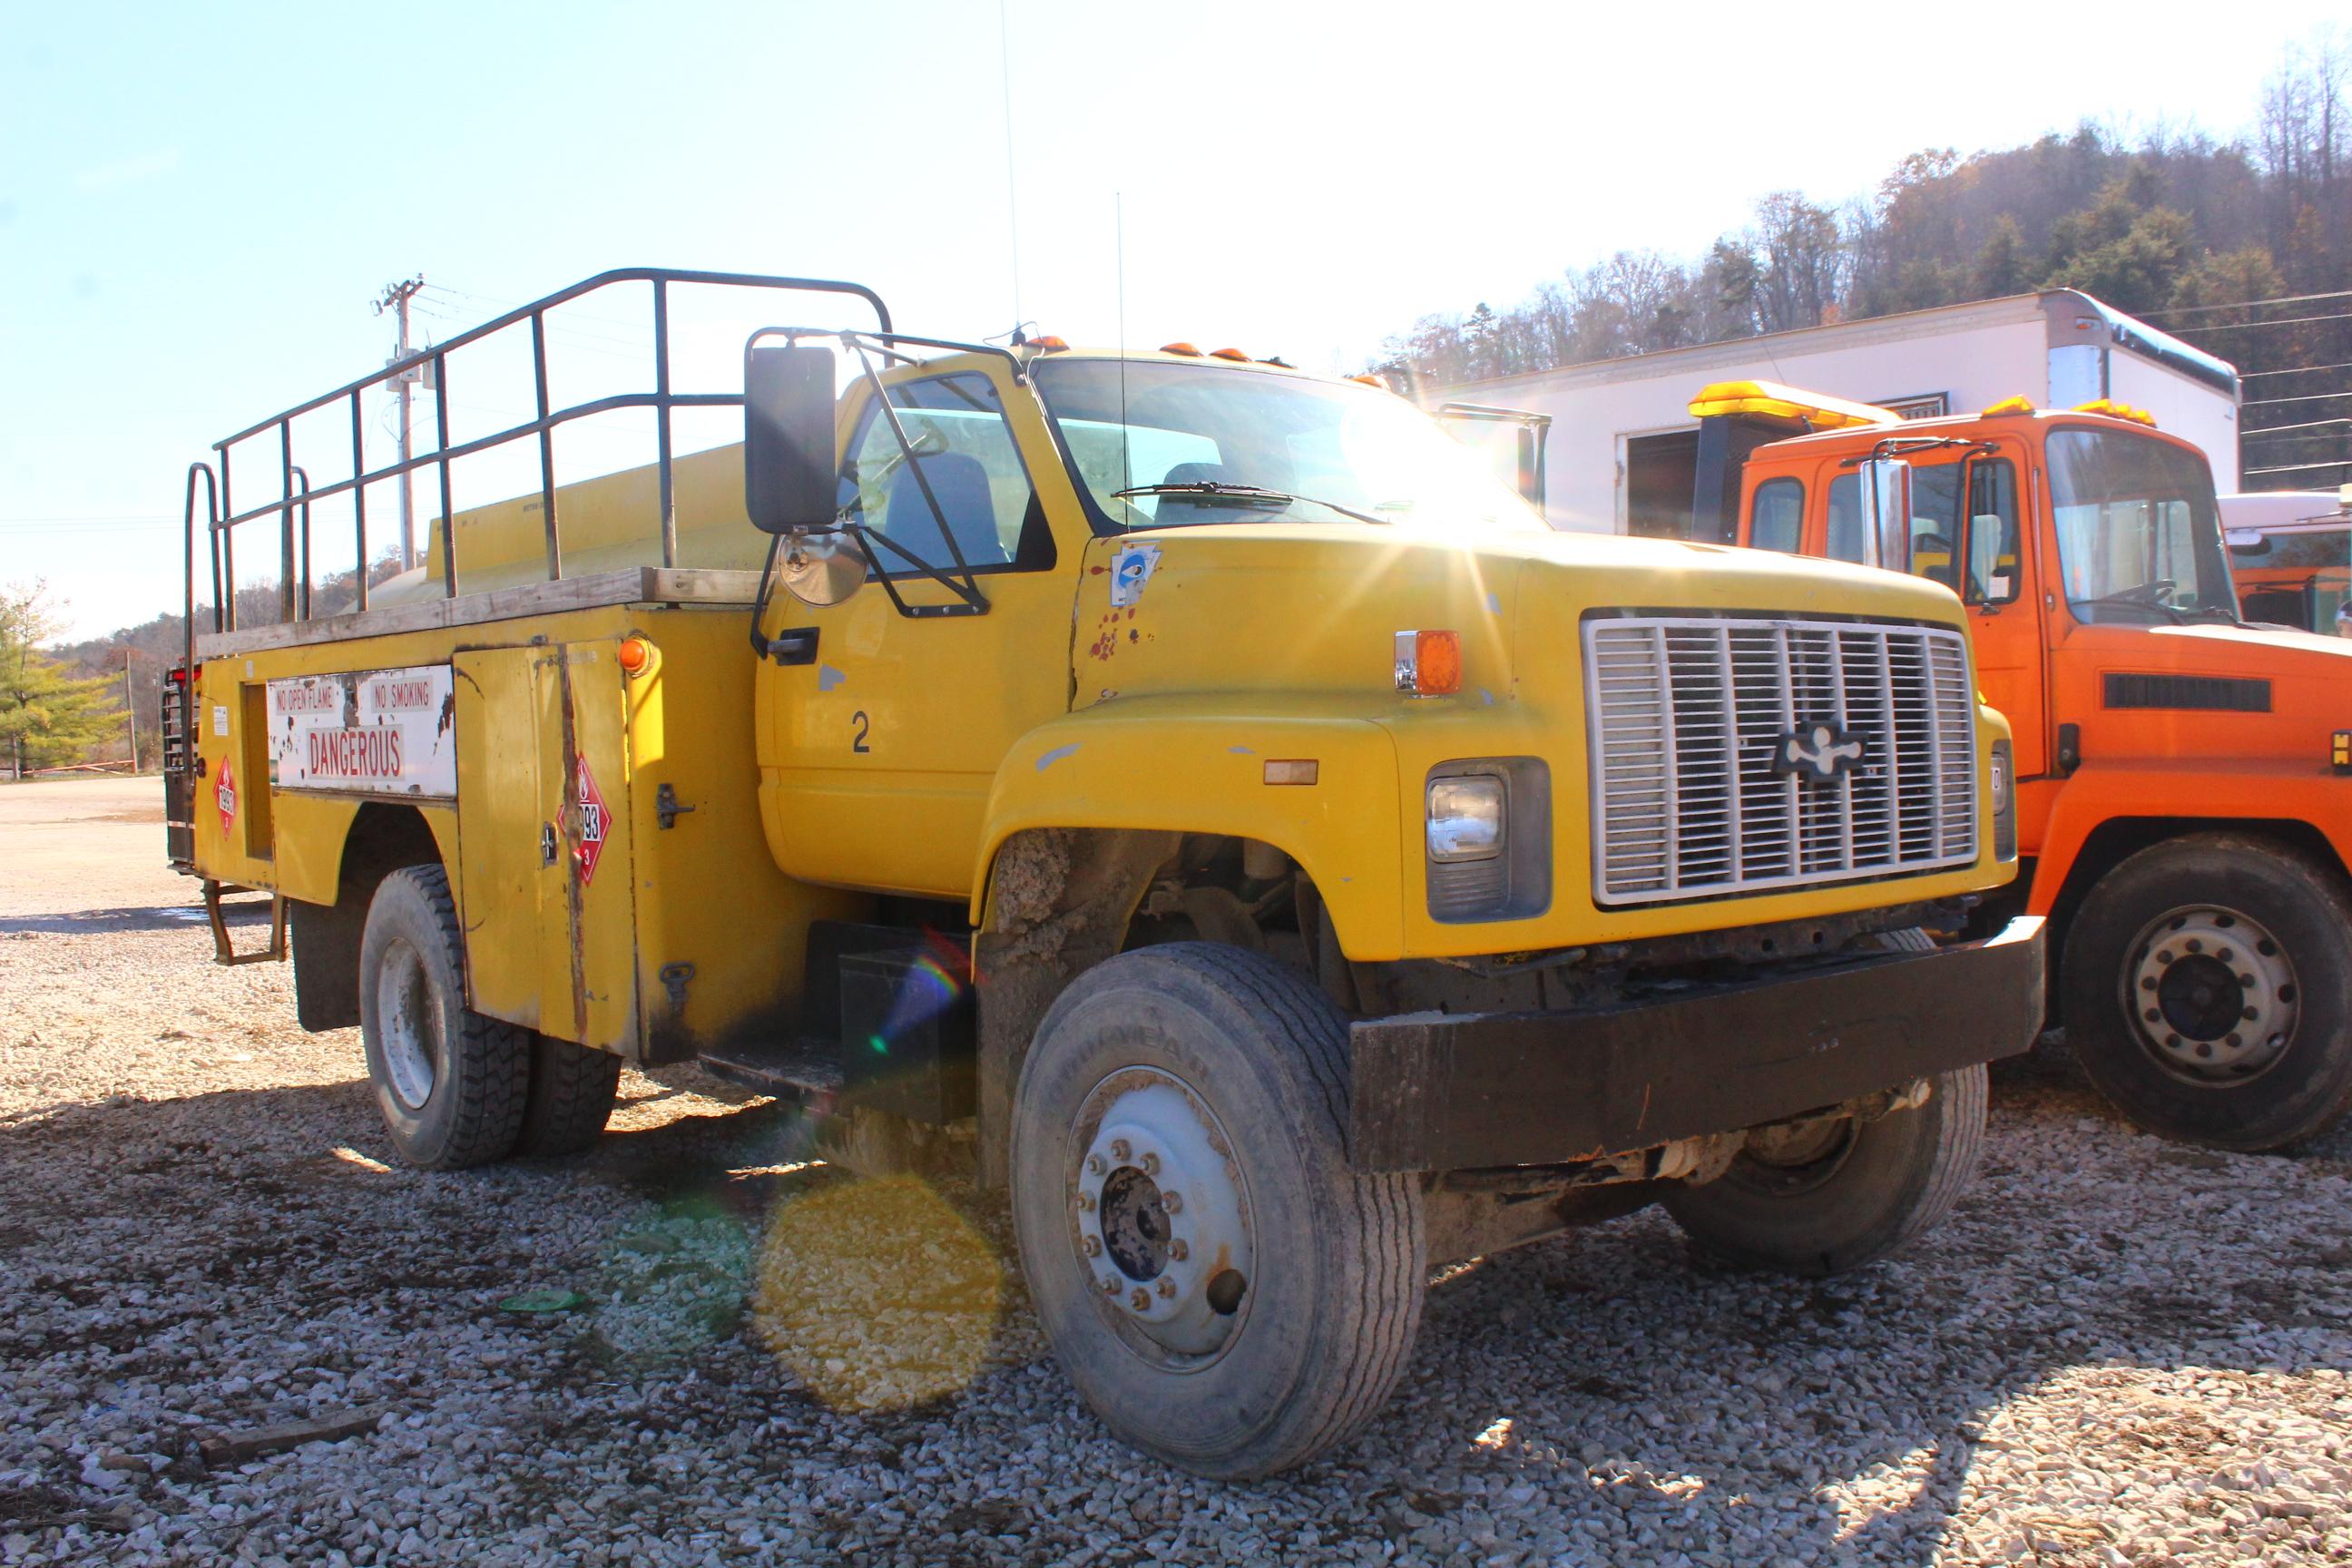 CHEVY KODIAK FUEL TRUCK CAT DSL ENG, AIR COMPRESSOR, LUBE TRUCK, FUEL TRUCK, HOLDS 700 GAL ON FUEL,